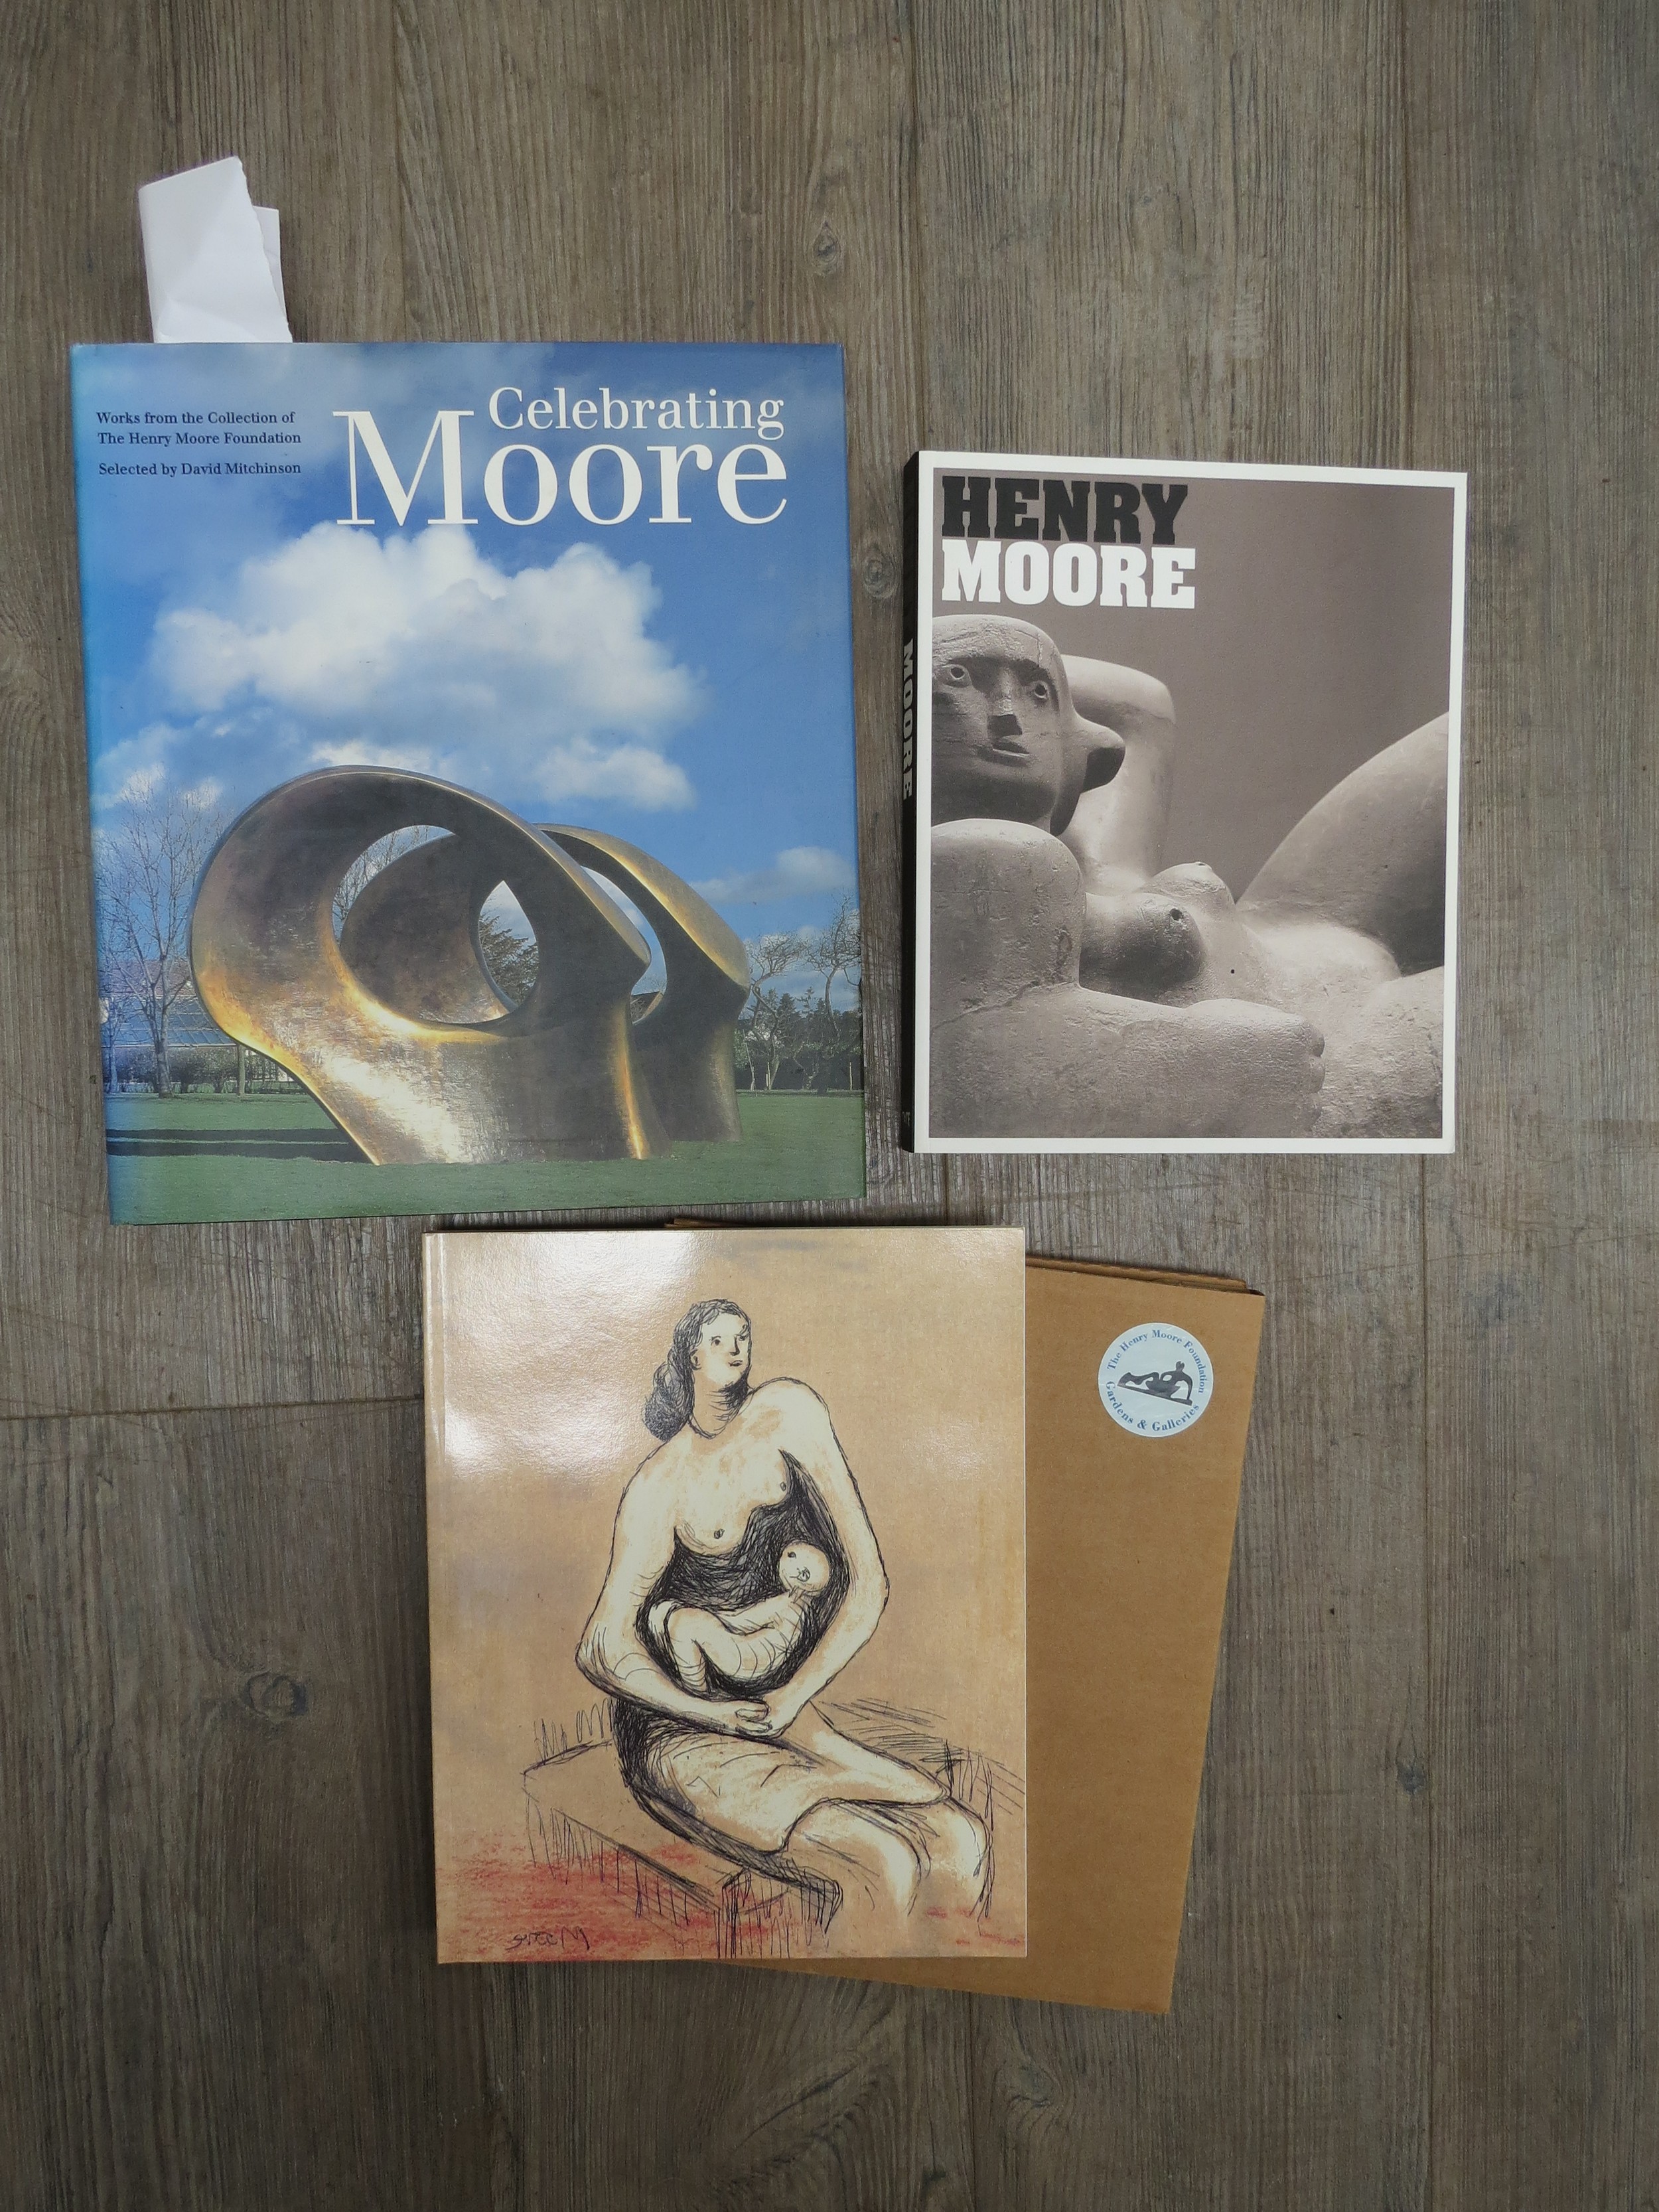 Three volumes relating to Henry Moore - Celebrating Moore, hardback. Tate - Henry Moore and Henry - Image 2 of 2